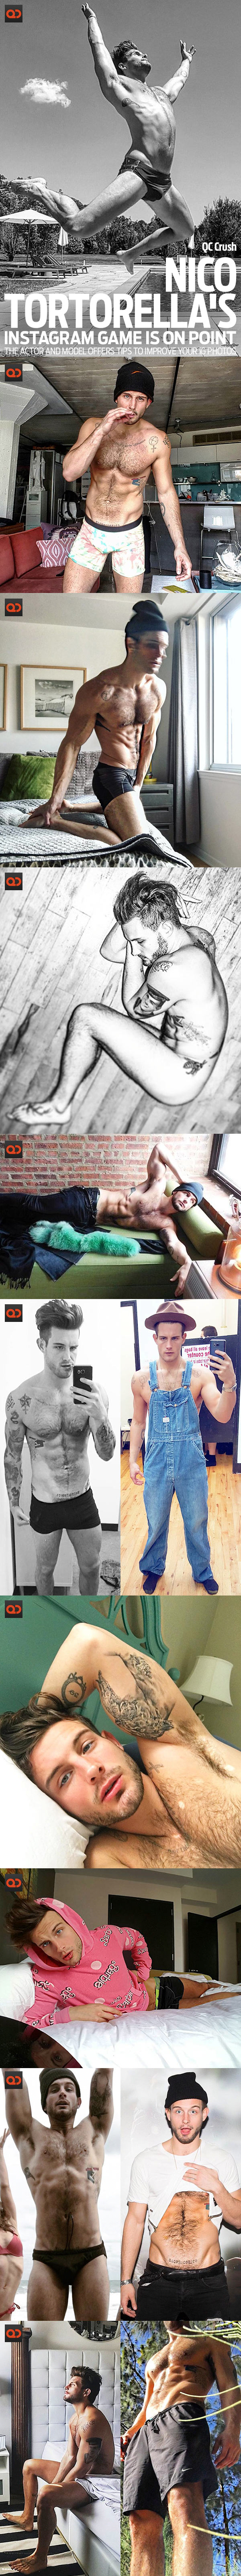 Nico Tortorella's Instagram Game Is On Point - The Actor And Model Offers Tips To Improve Your IG Photos